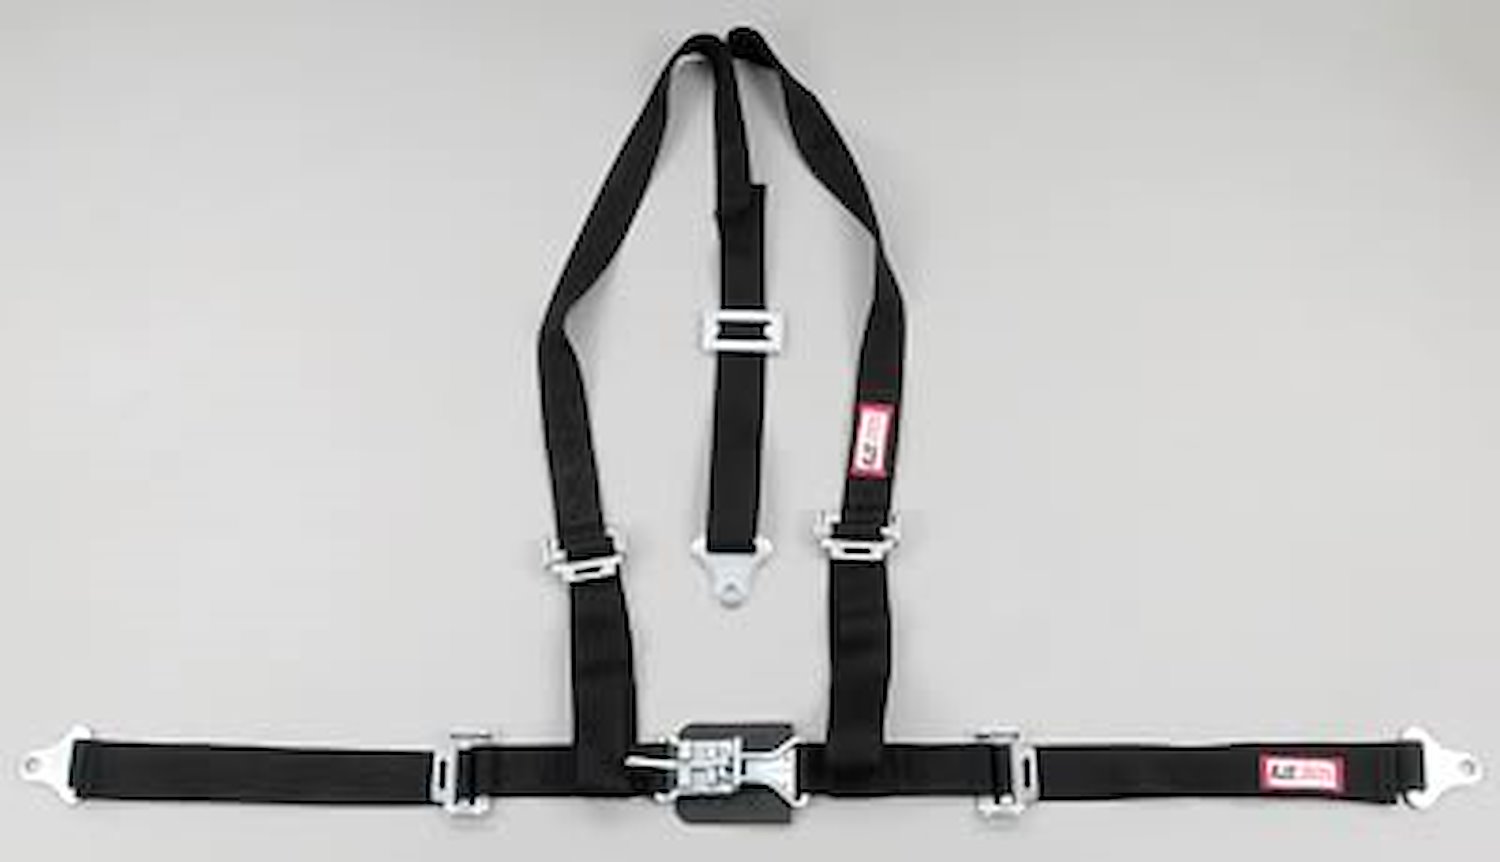 NON-SFI L&L HARNESS 3 PULL DOWN Lap Belt SNAP SEWN IN 2 S.H. Individual FLOOR Mount WRAP/BOLT BLUE